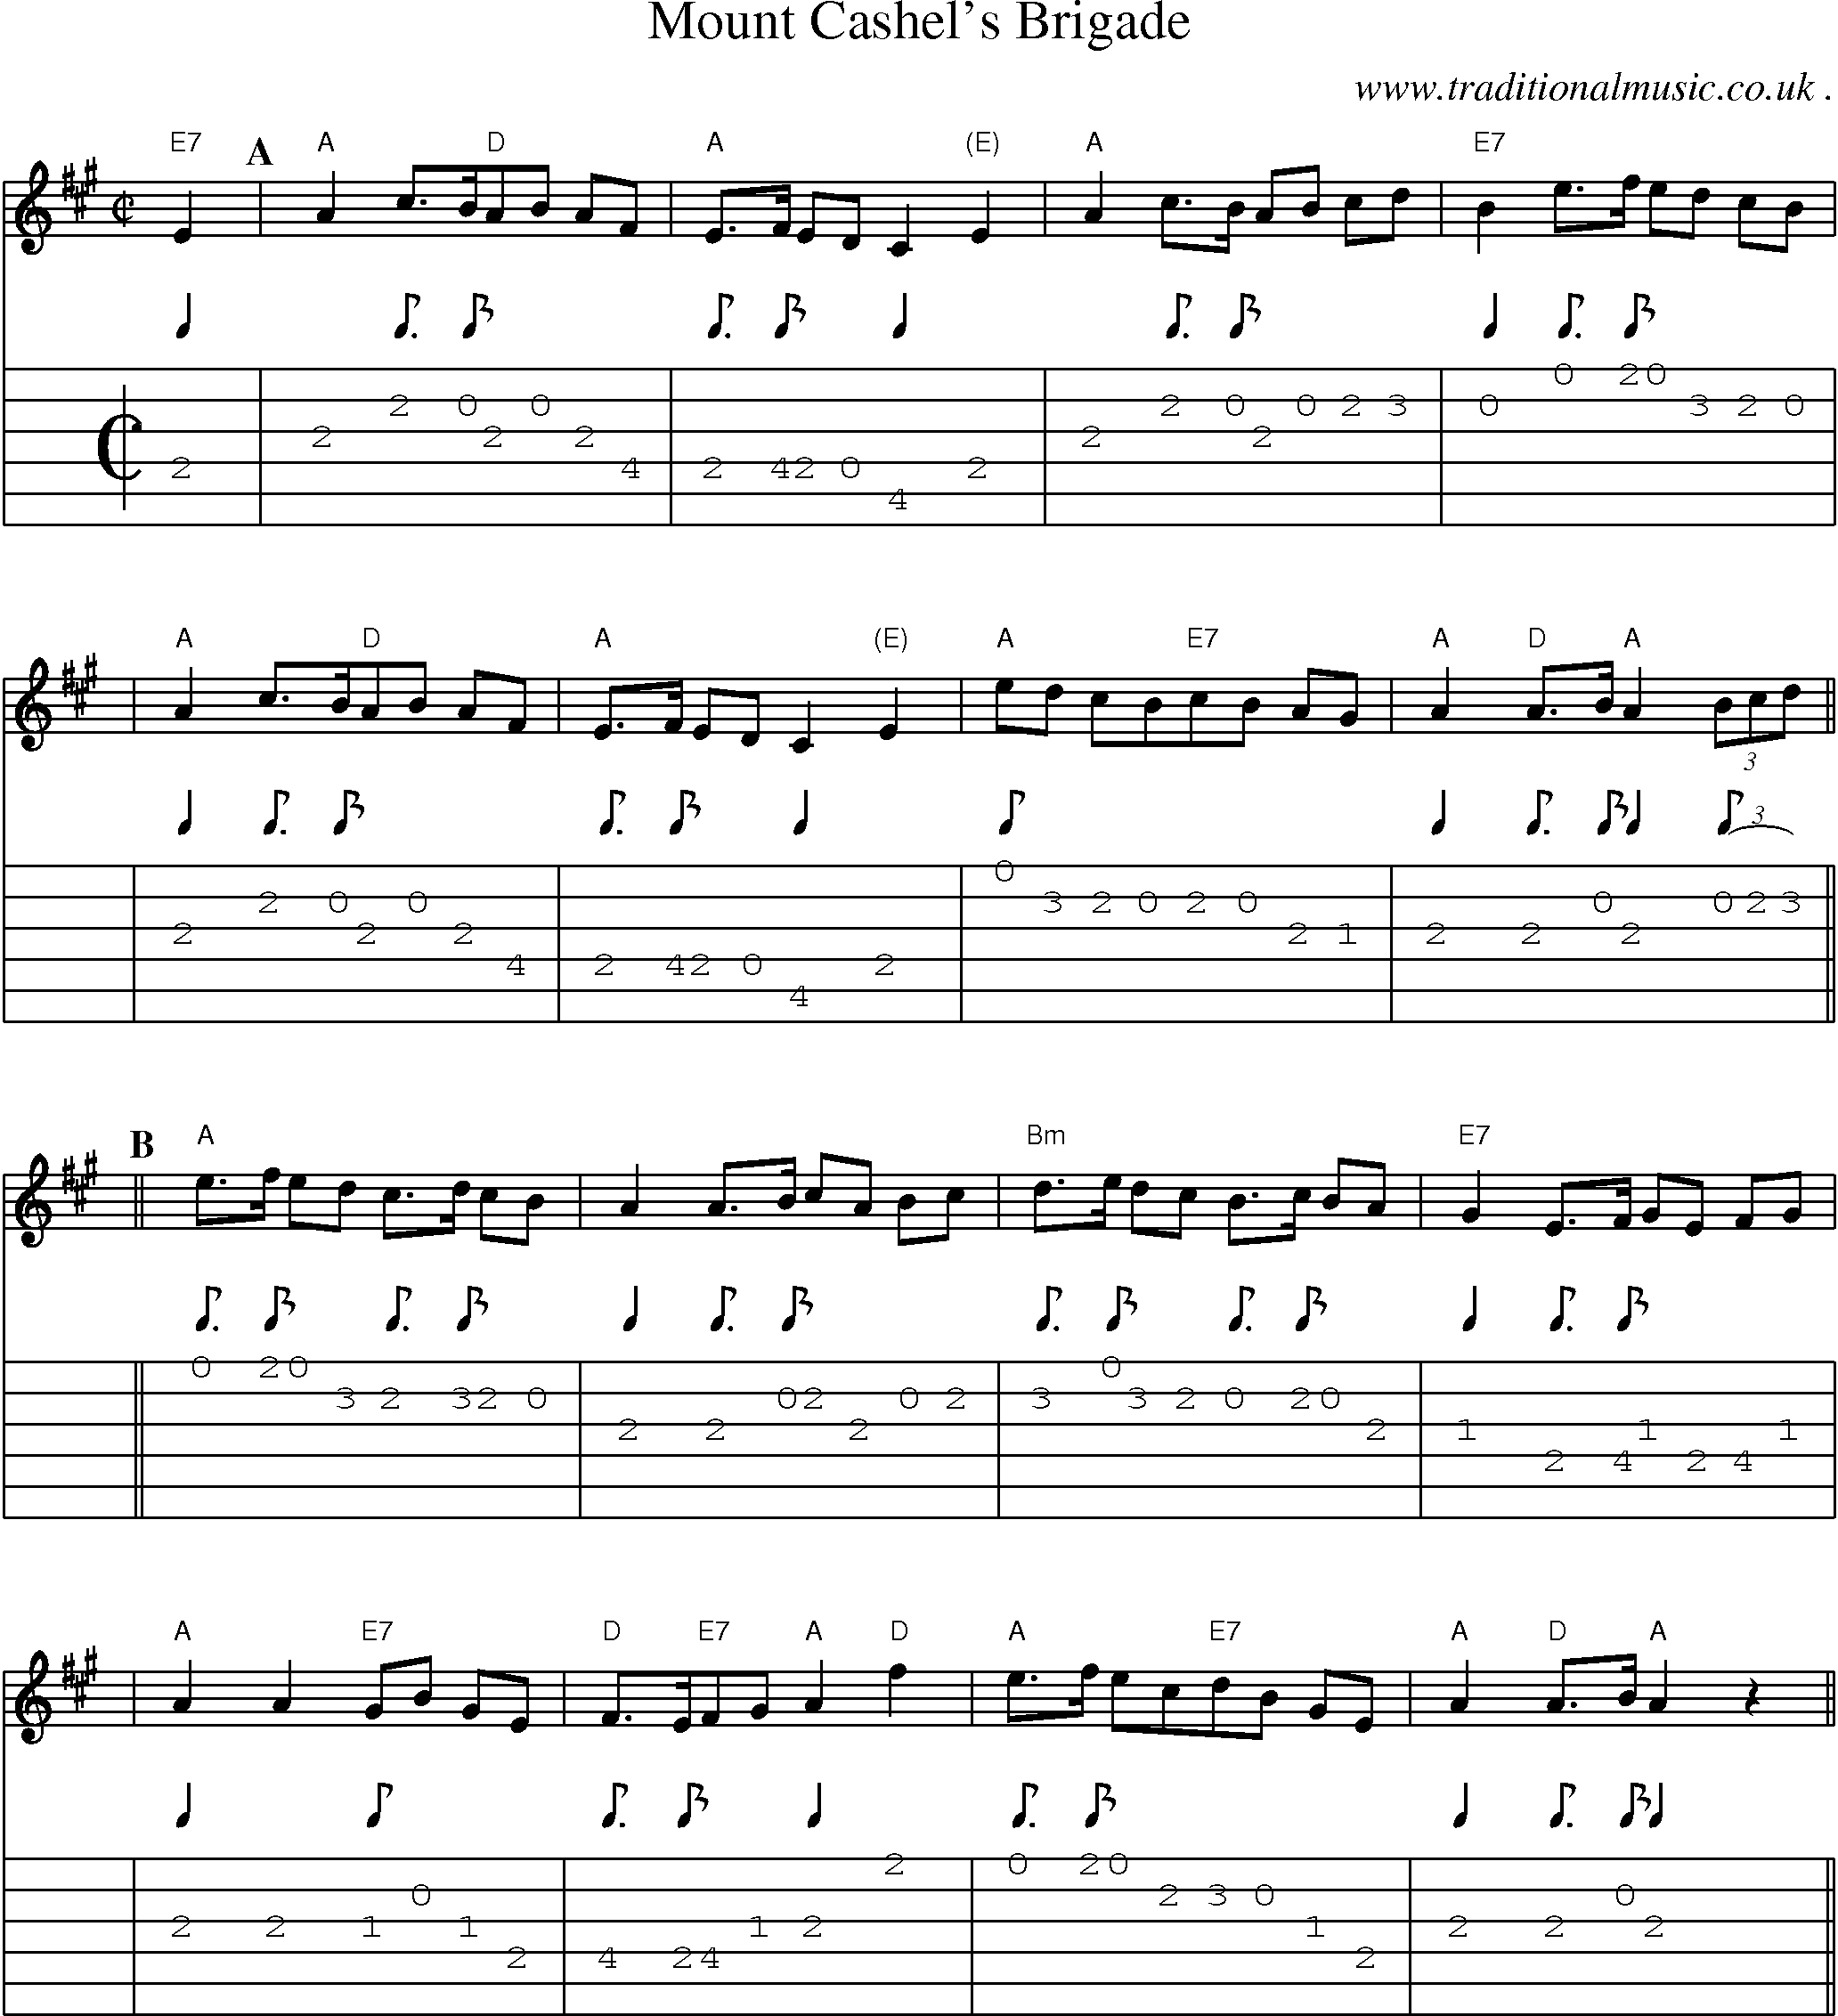 Sheet-Music and Guitar Tabs for Mount Cashels Brigade